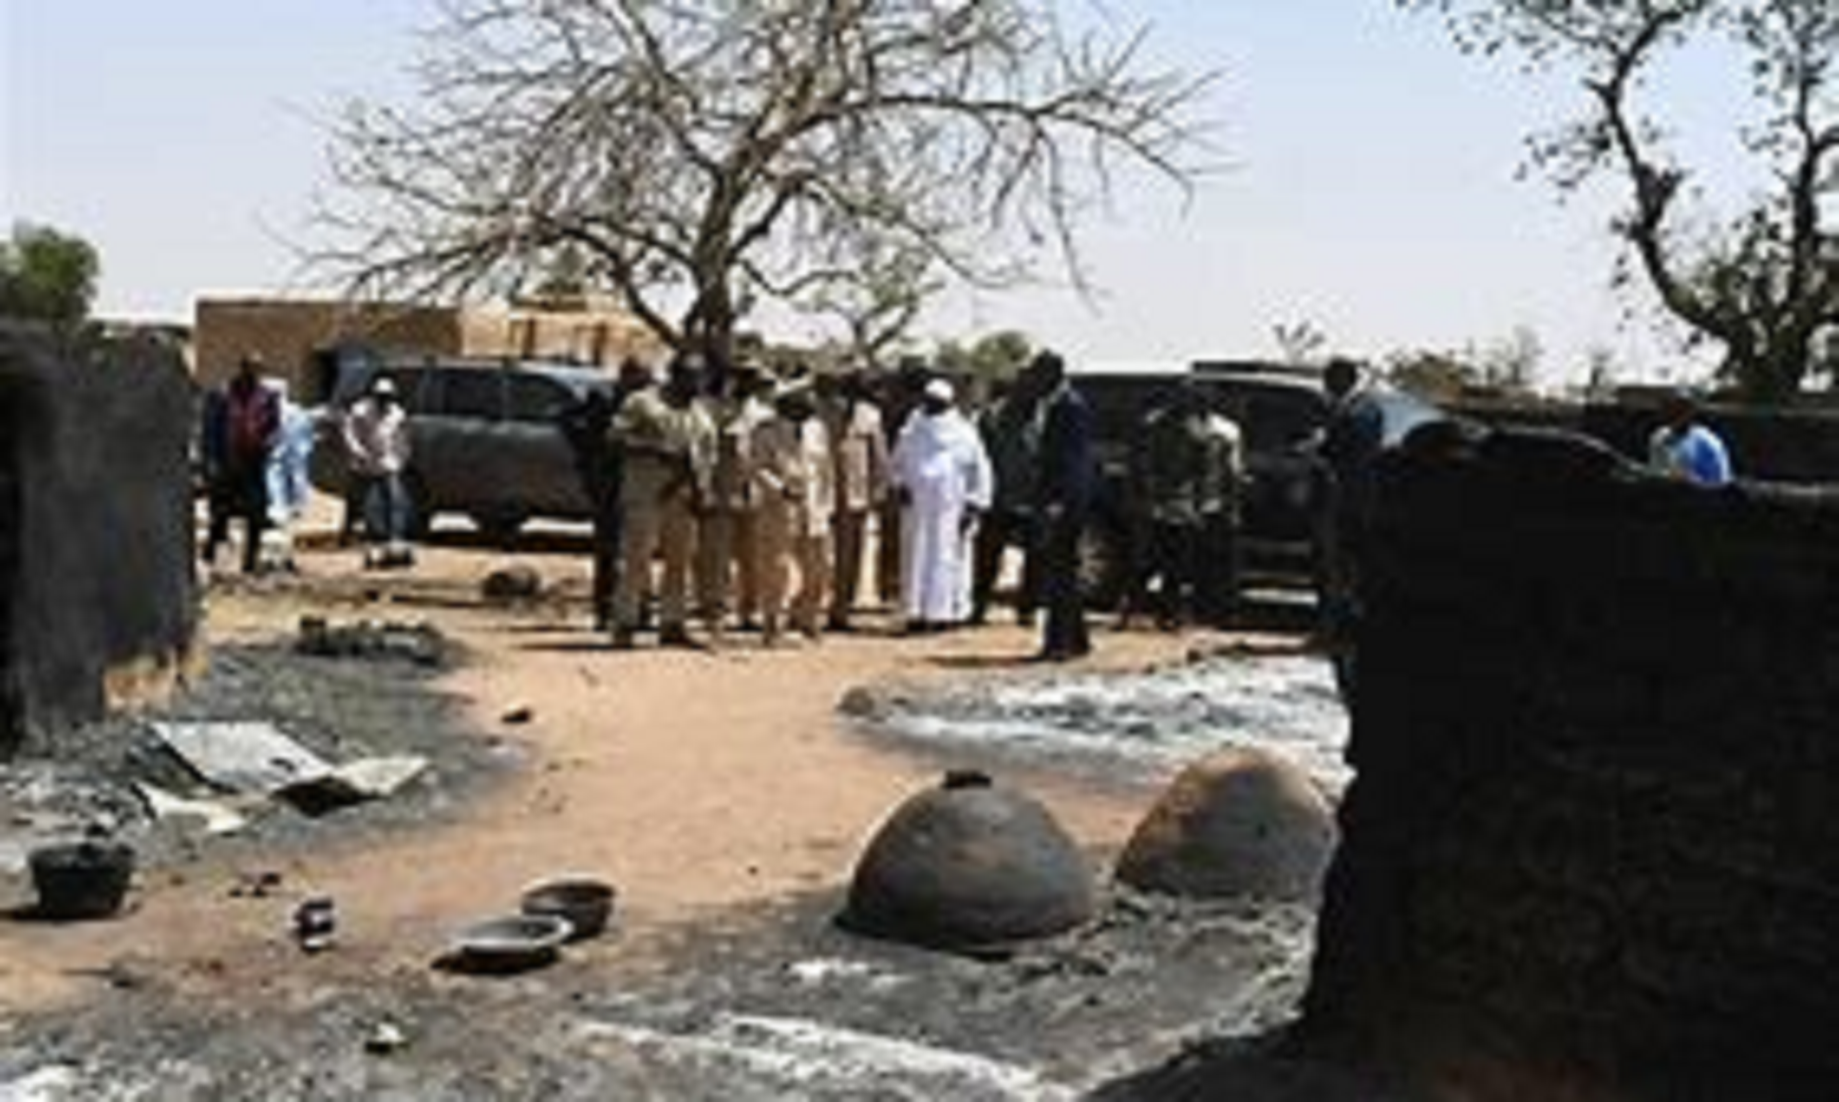 Death Toll Of Attack On Ogossagou Village In Central Mali Rises To 31: Official